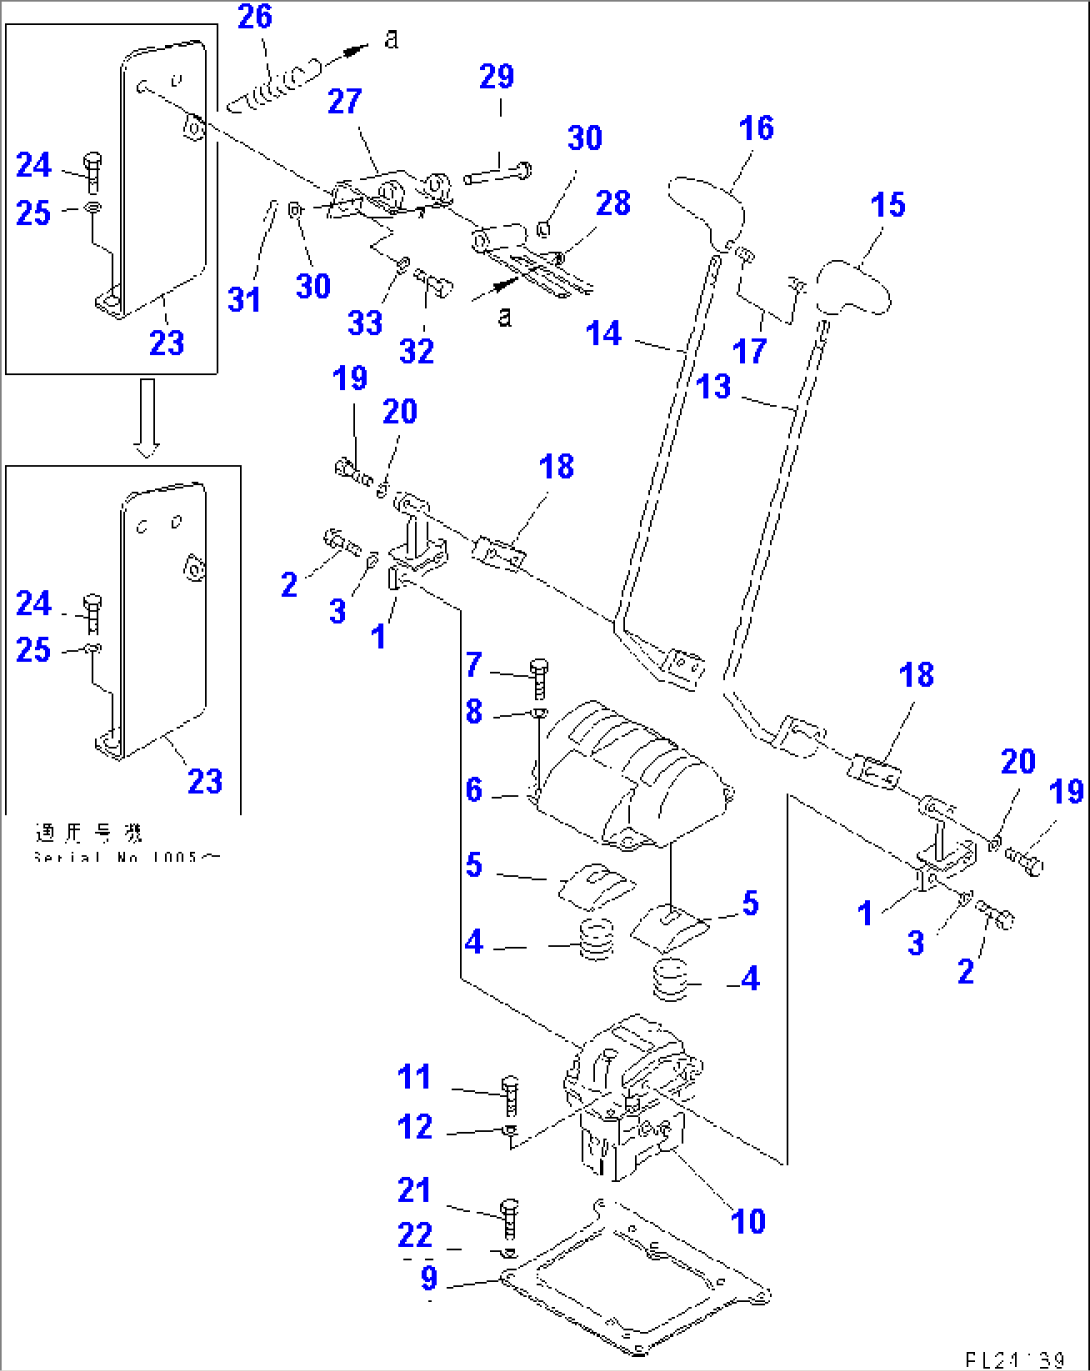 TRAVEL CONTROL LEVER AND LINKAGE